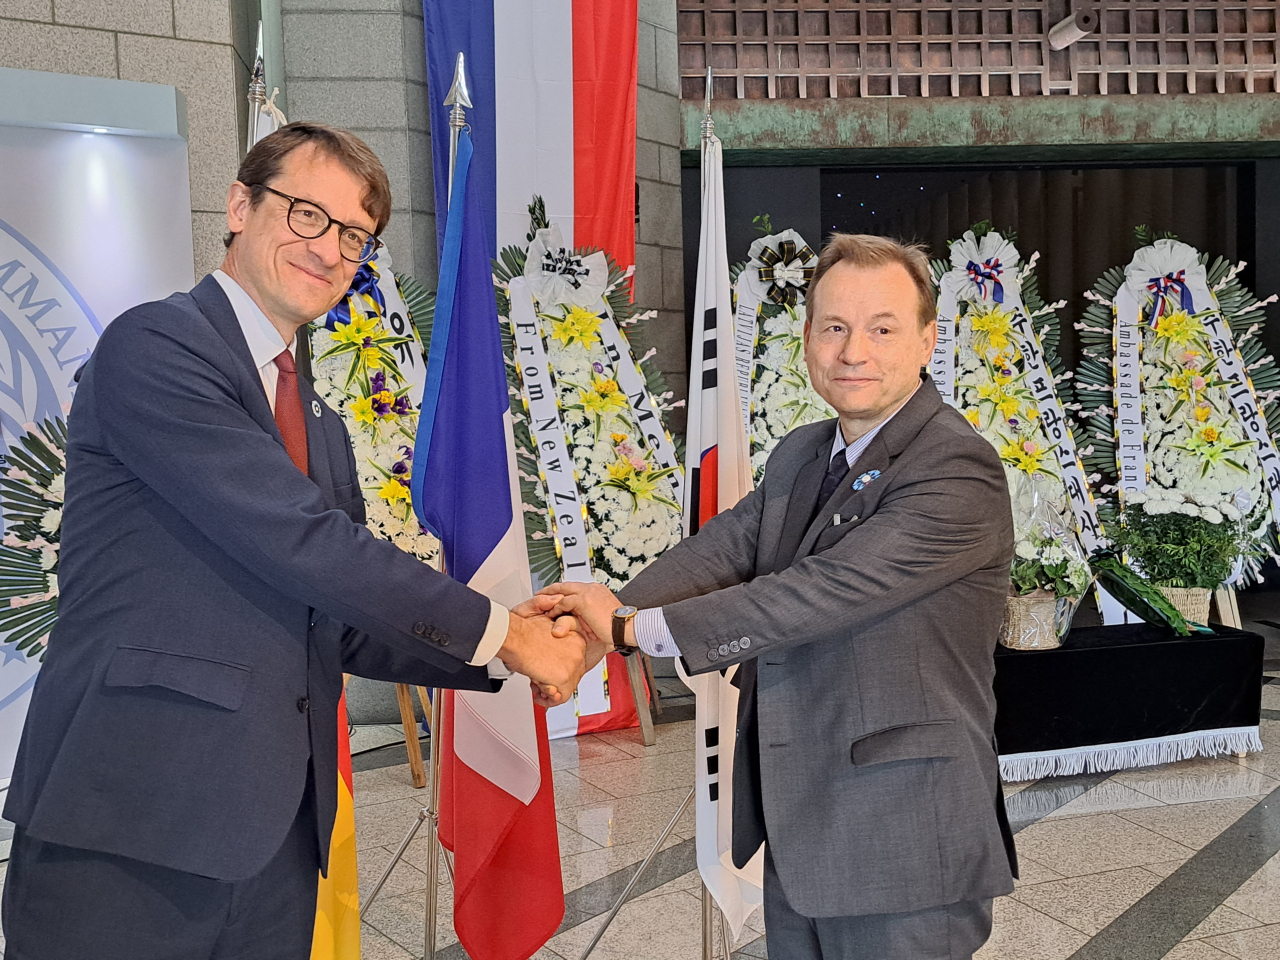 French Ambassador to Korea Philippe Bertoux (left) and German Ambassador to Korea Georg Schmidt attend a memorial and wreath-laying ceremony marking the 105th anniversary of the end of World War I, known as Armistice Day, on Friday. World War I officially concluded with the signing of the Treaty of Versailles on June 28, 1919, at the Palace of Versailles outside the town of Versailles, France. Armistice Day, observed annually on November 11th, commemorates the end of hostilities on the Western Front and pays tribute to the bravery and sacrifice of those who served during the war. (French Embassy in Seoul)